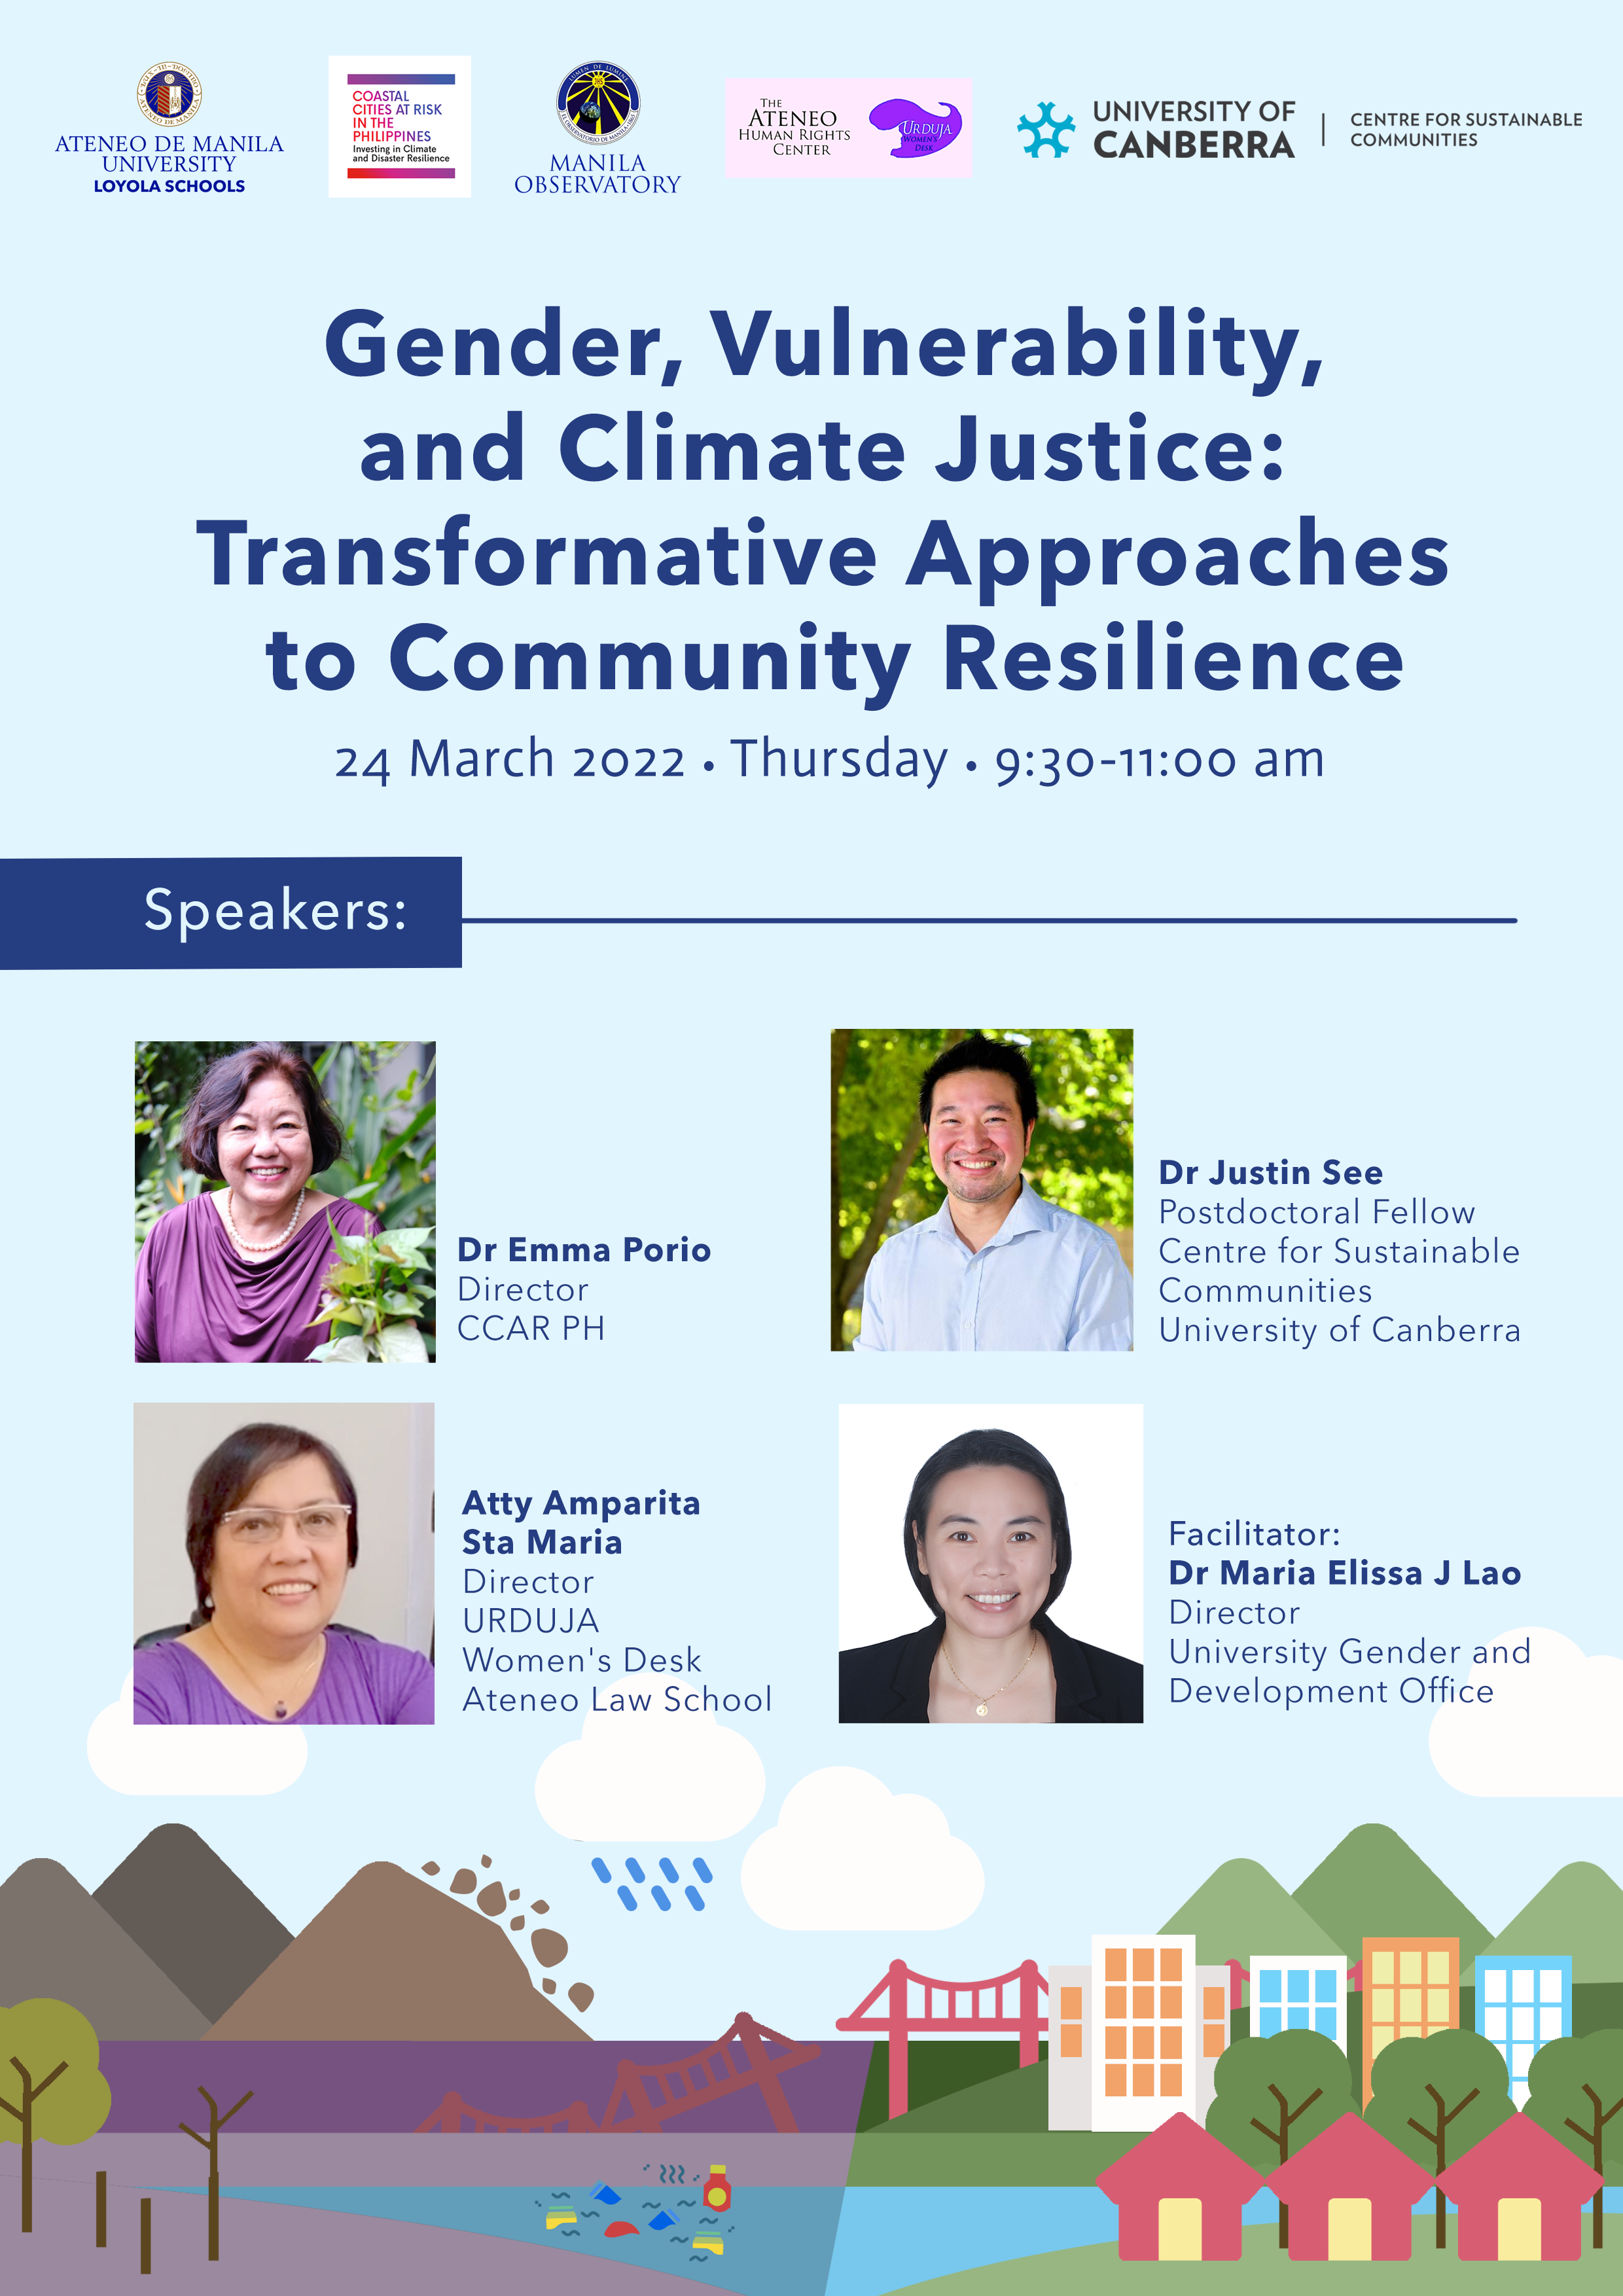 poster for the Gender, Vulnerability and Climate Justice event on March 24